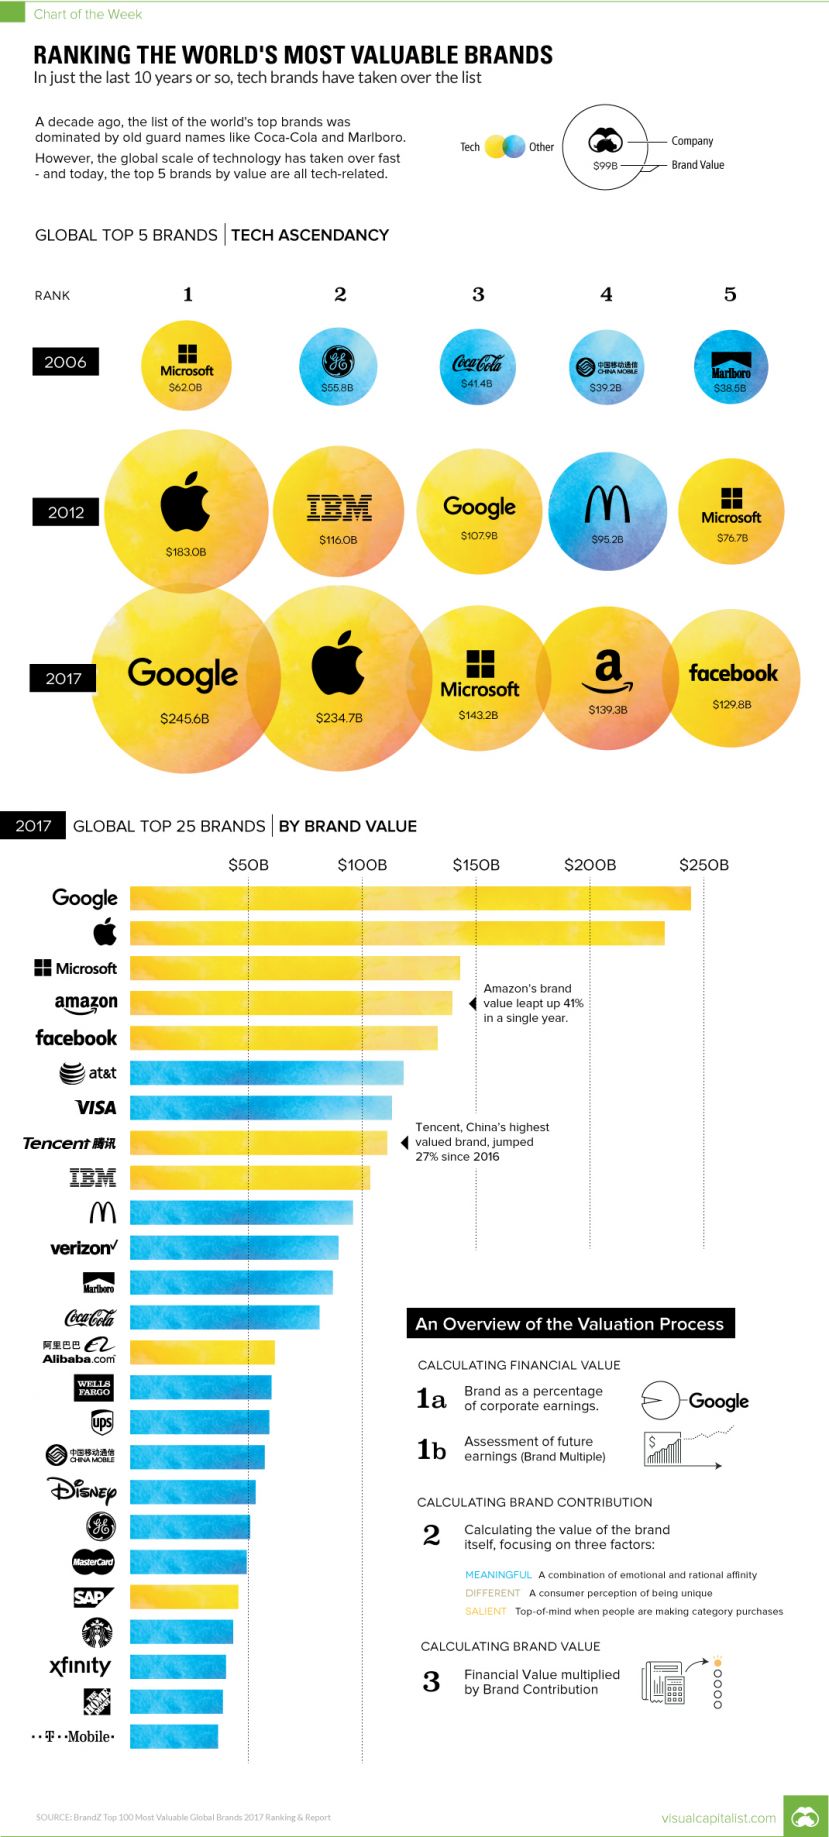 Ranking the World’s Most Valuable Brands